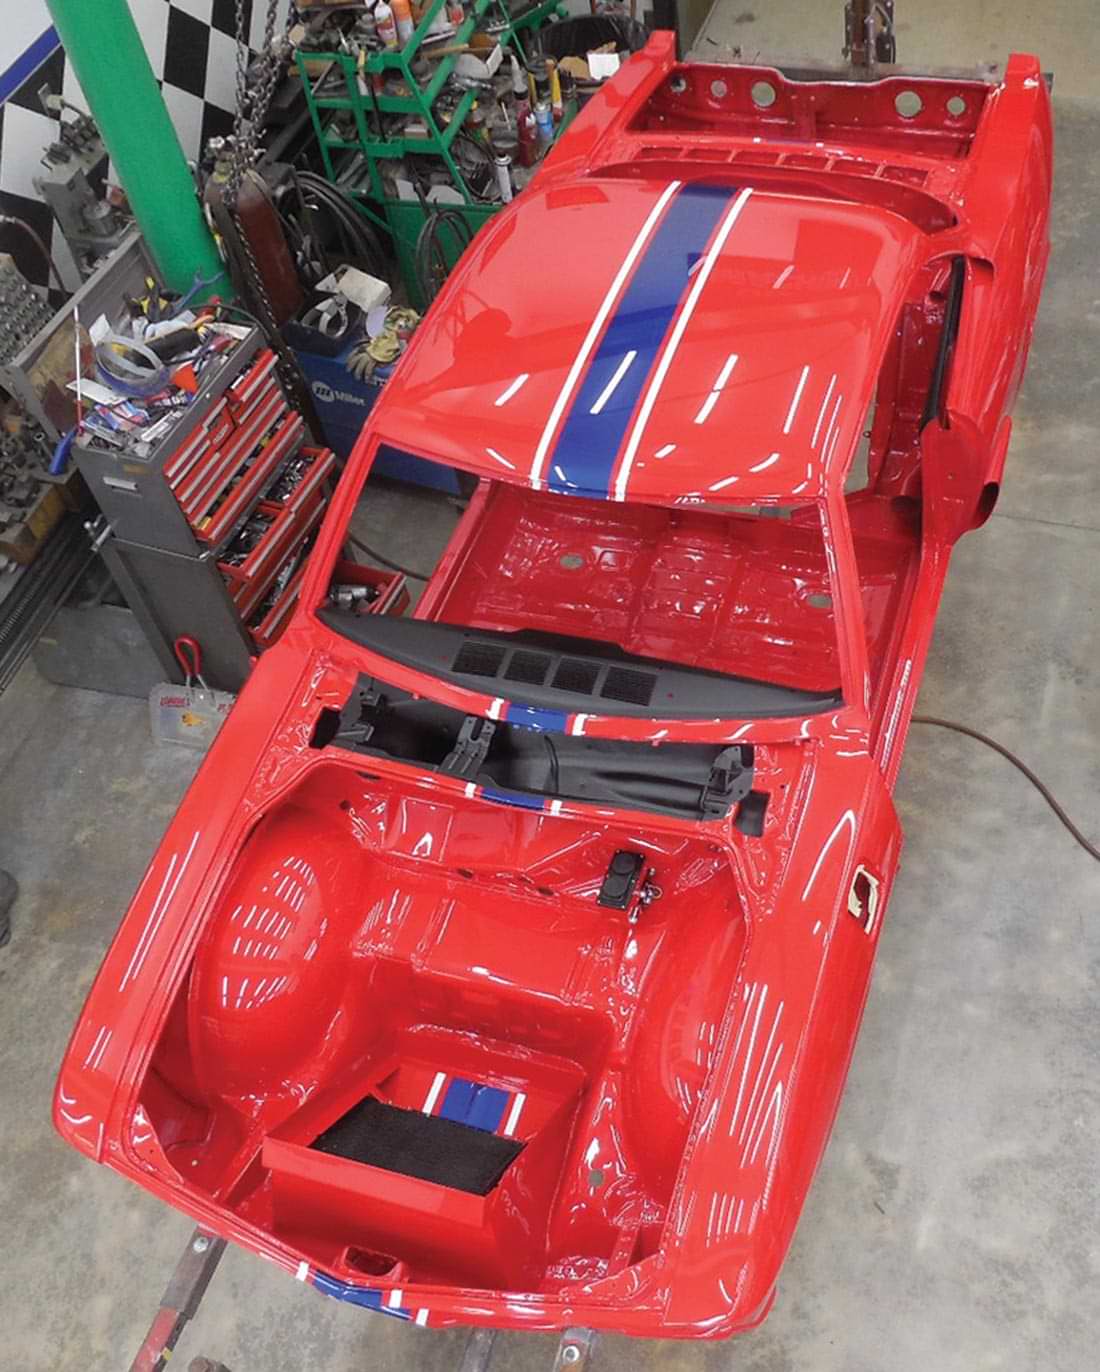 top view of the RareVair body with a completed paint job of Pull Me Over Red, and a blue stripe